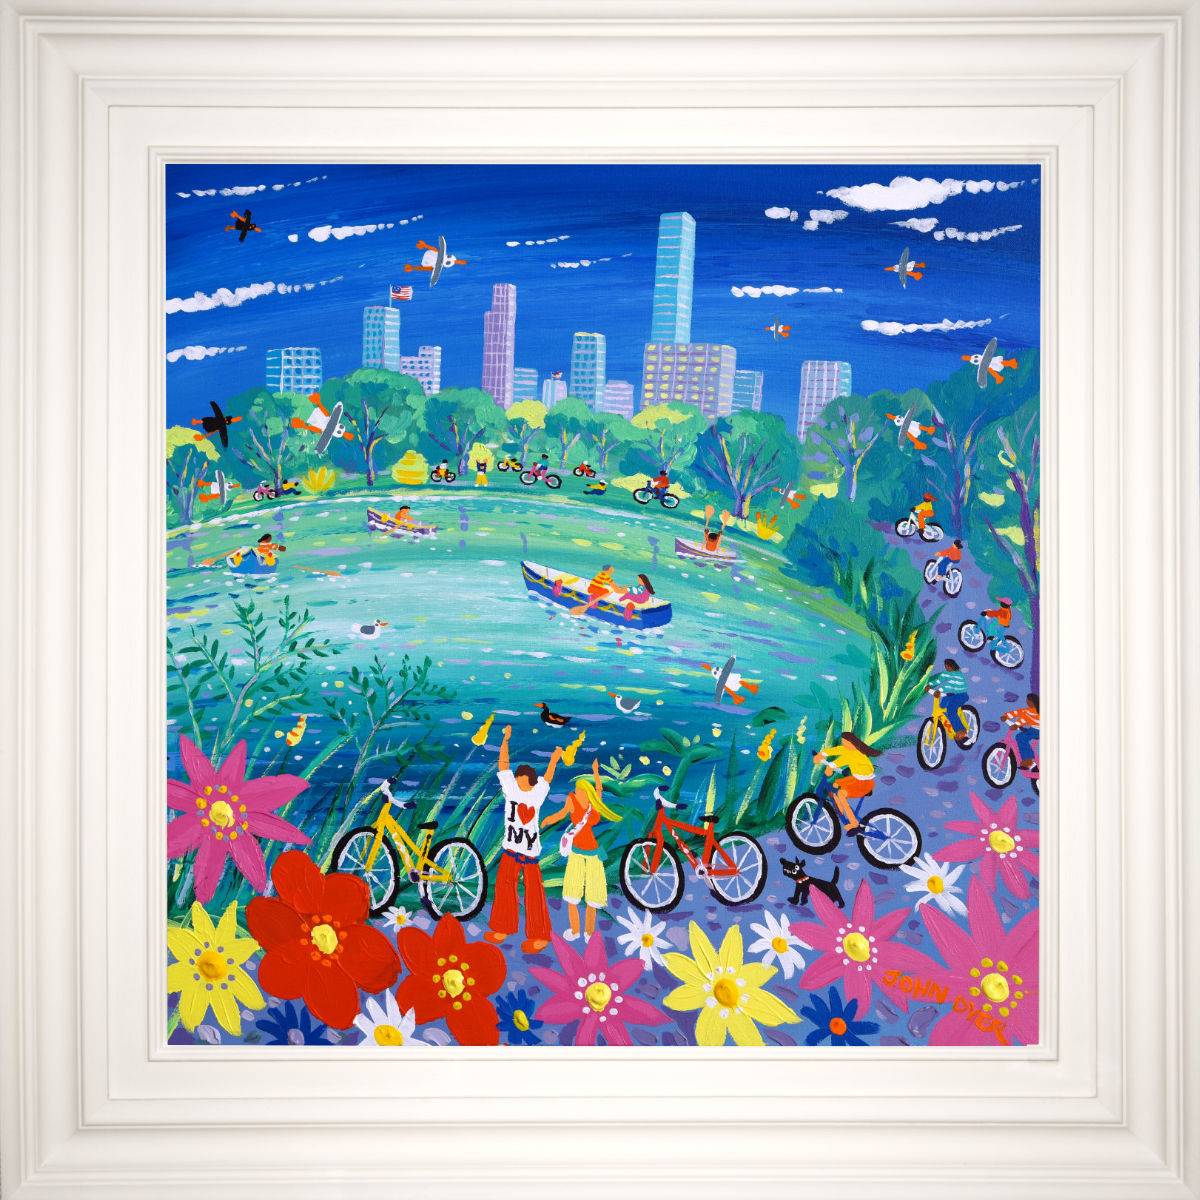 &#39;Cycling around Central Park, New York&#39;, 24x24 inches acrylic on canvas. Paintings of America by British Artist John Dyer. American Art Gallery